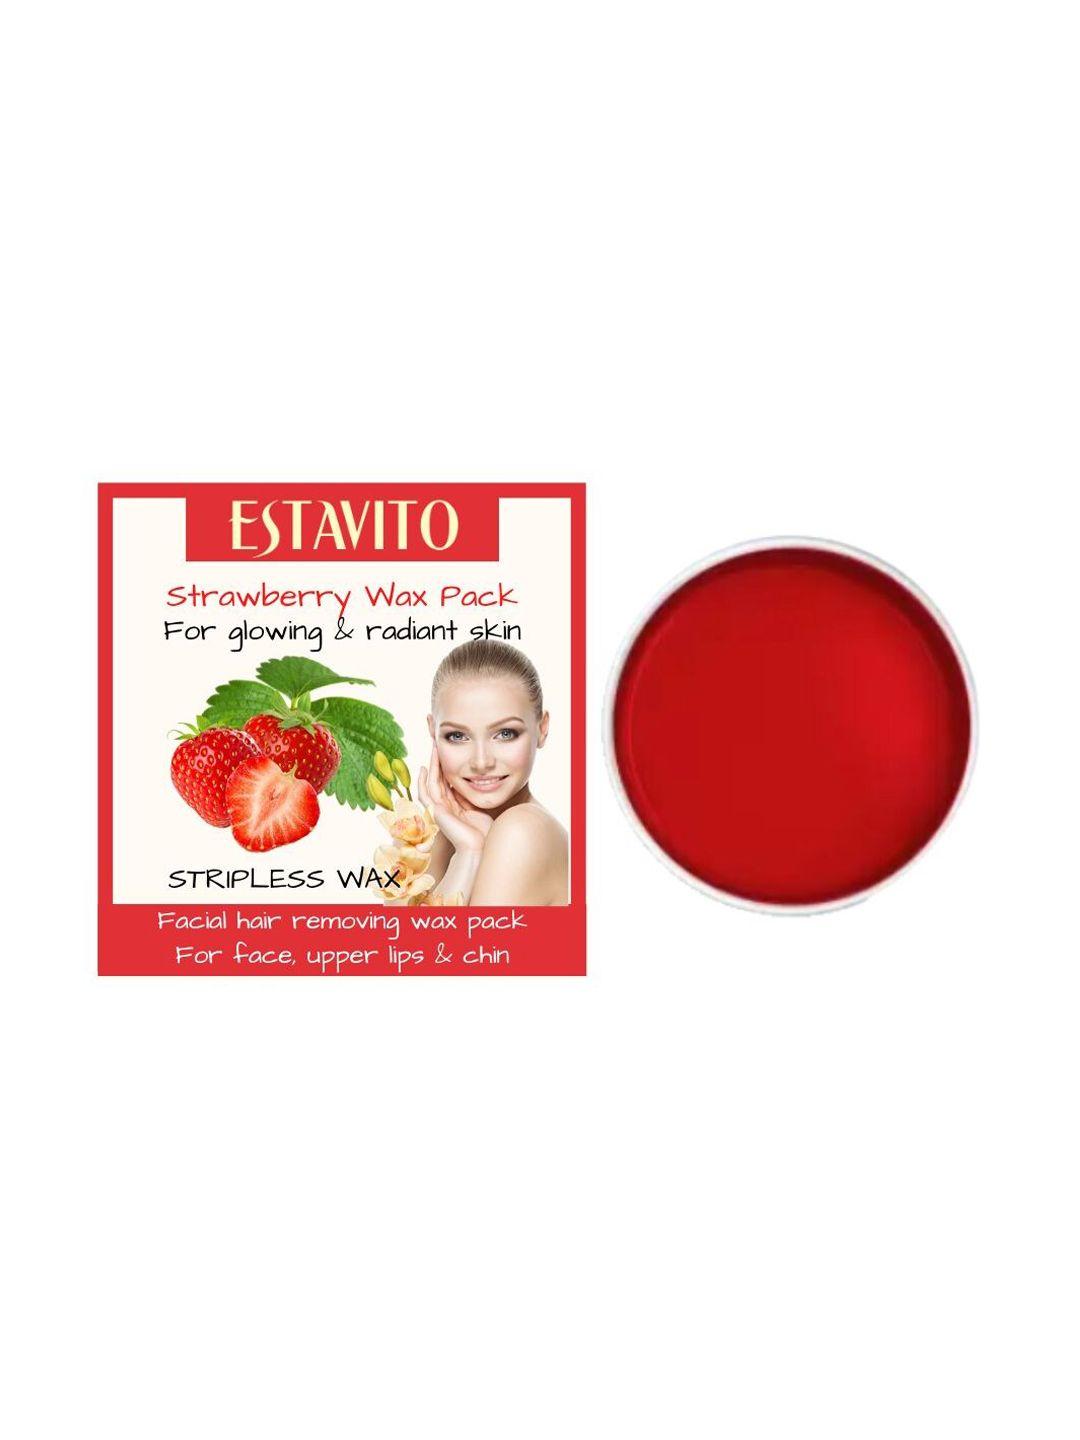 estavito strawberry facial hair removing stripless wax for glowing & radiant skin - 80g